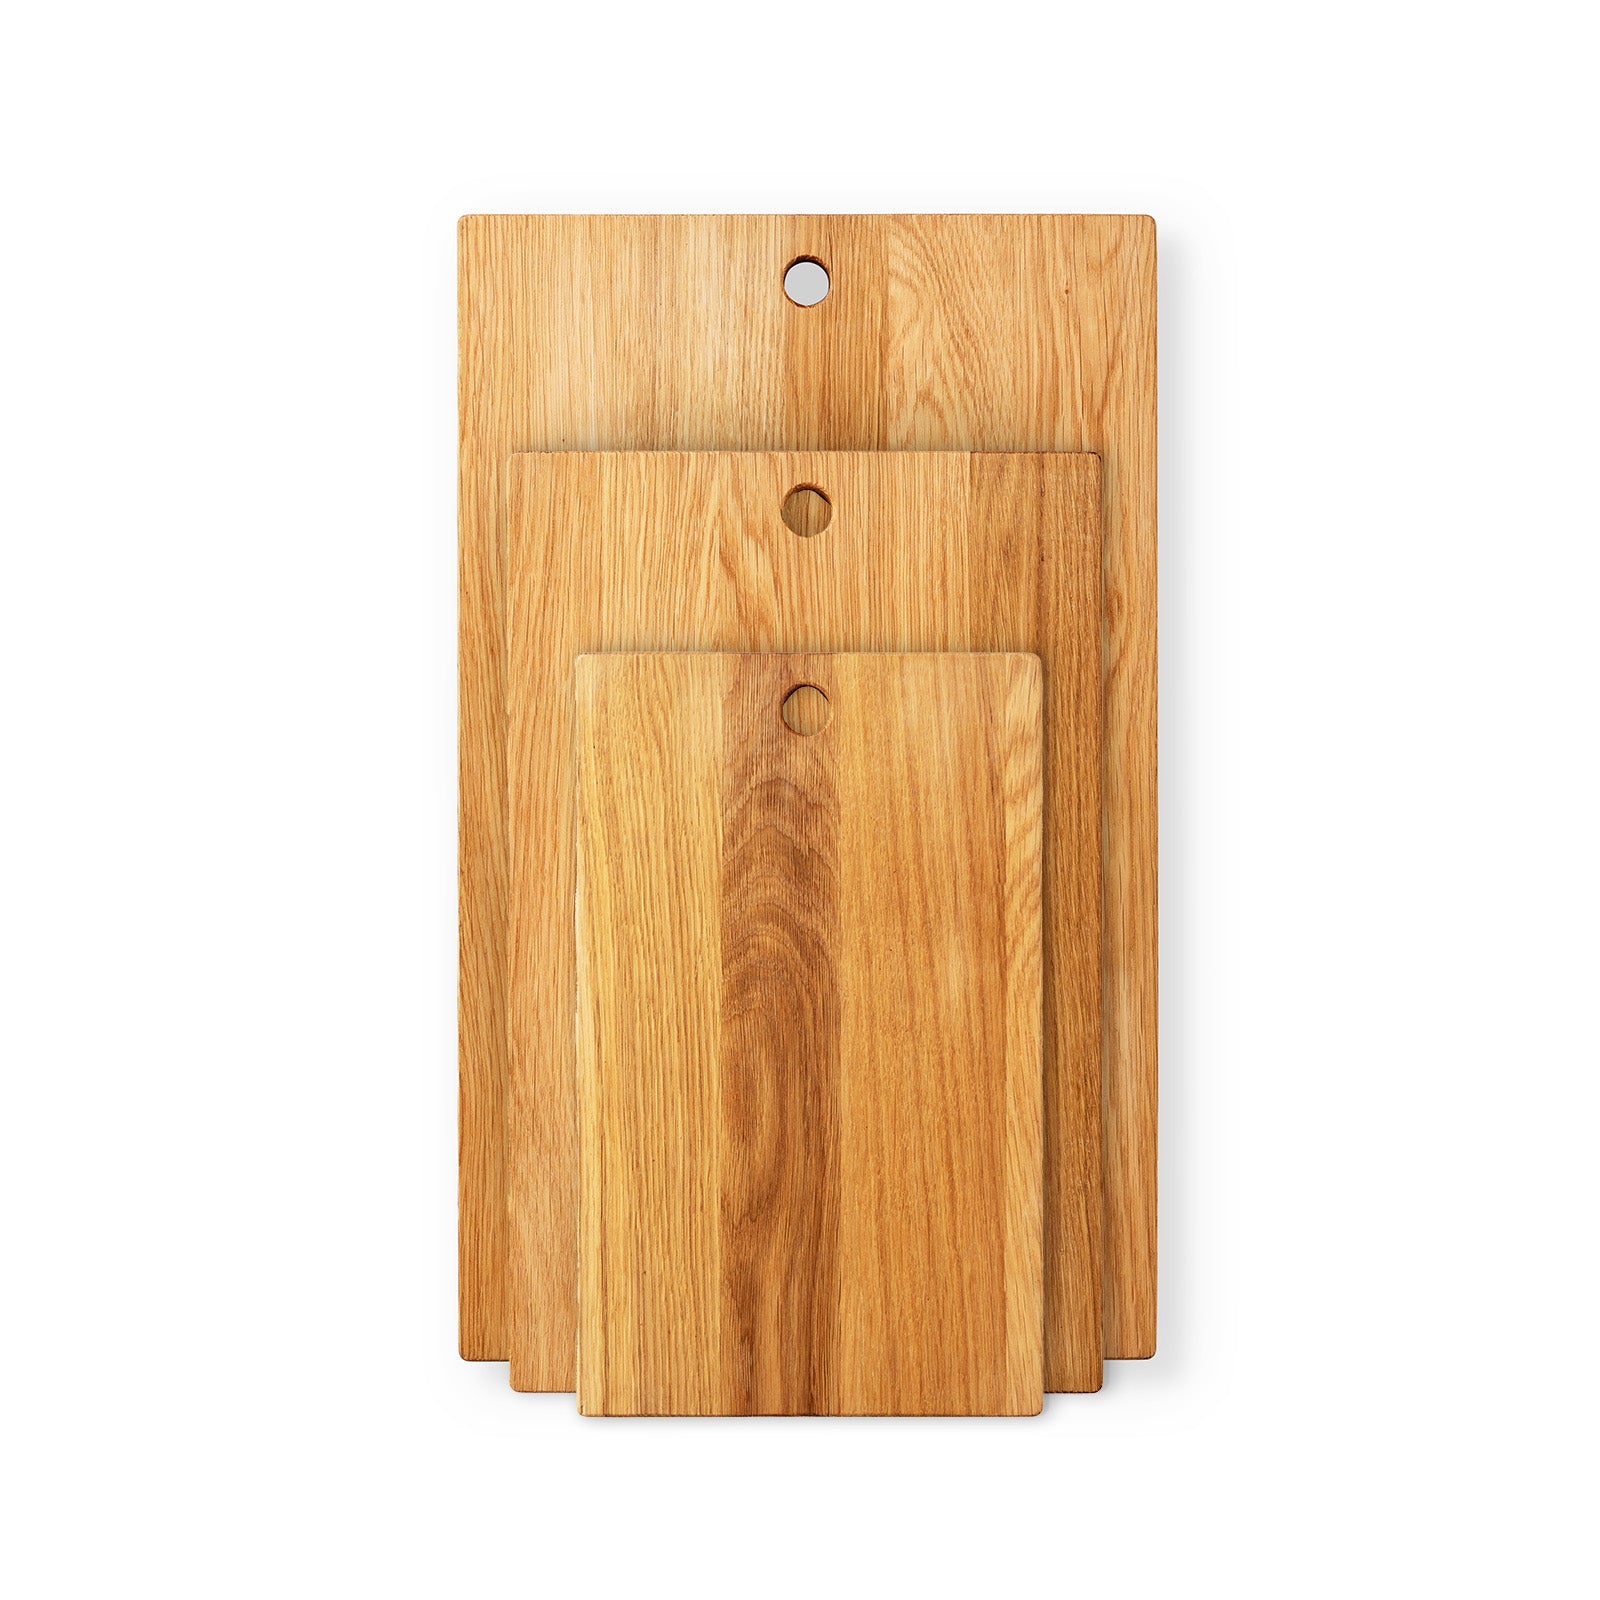 A cutting board for demanding people